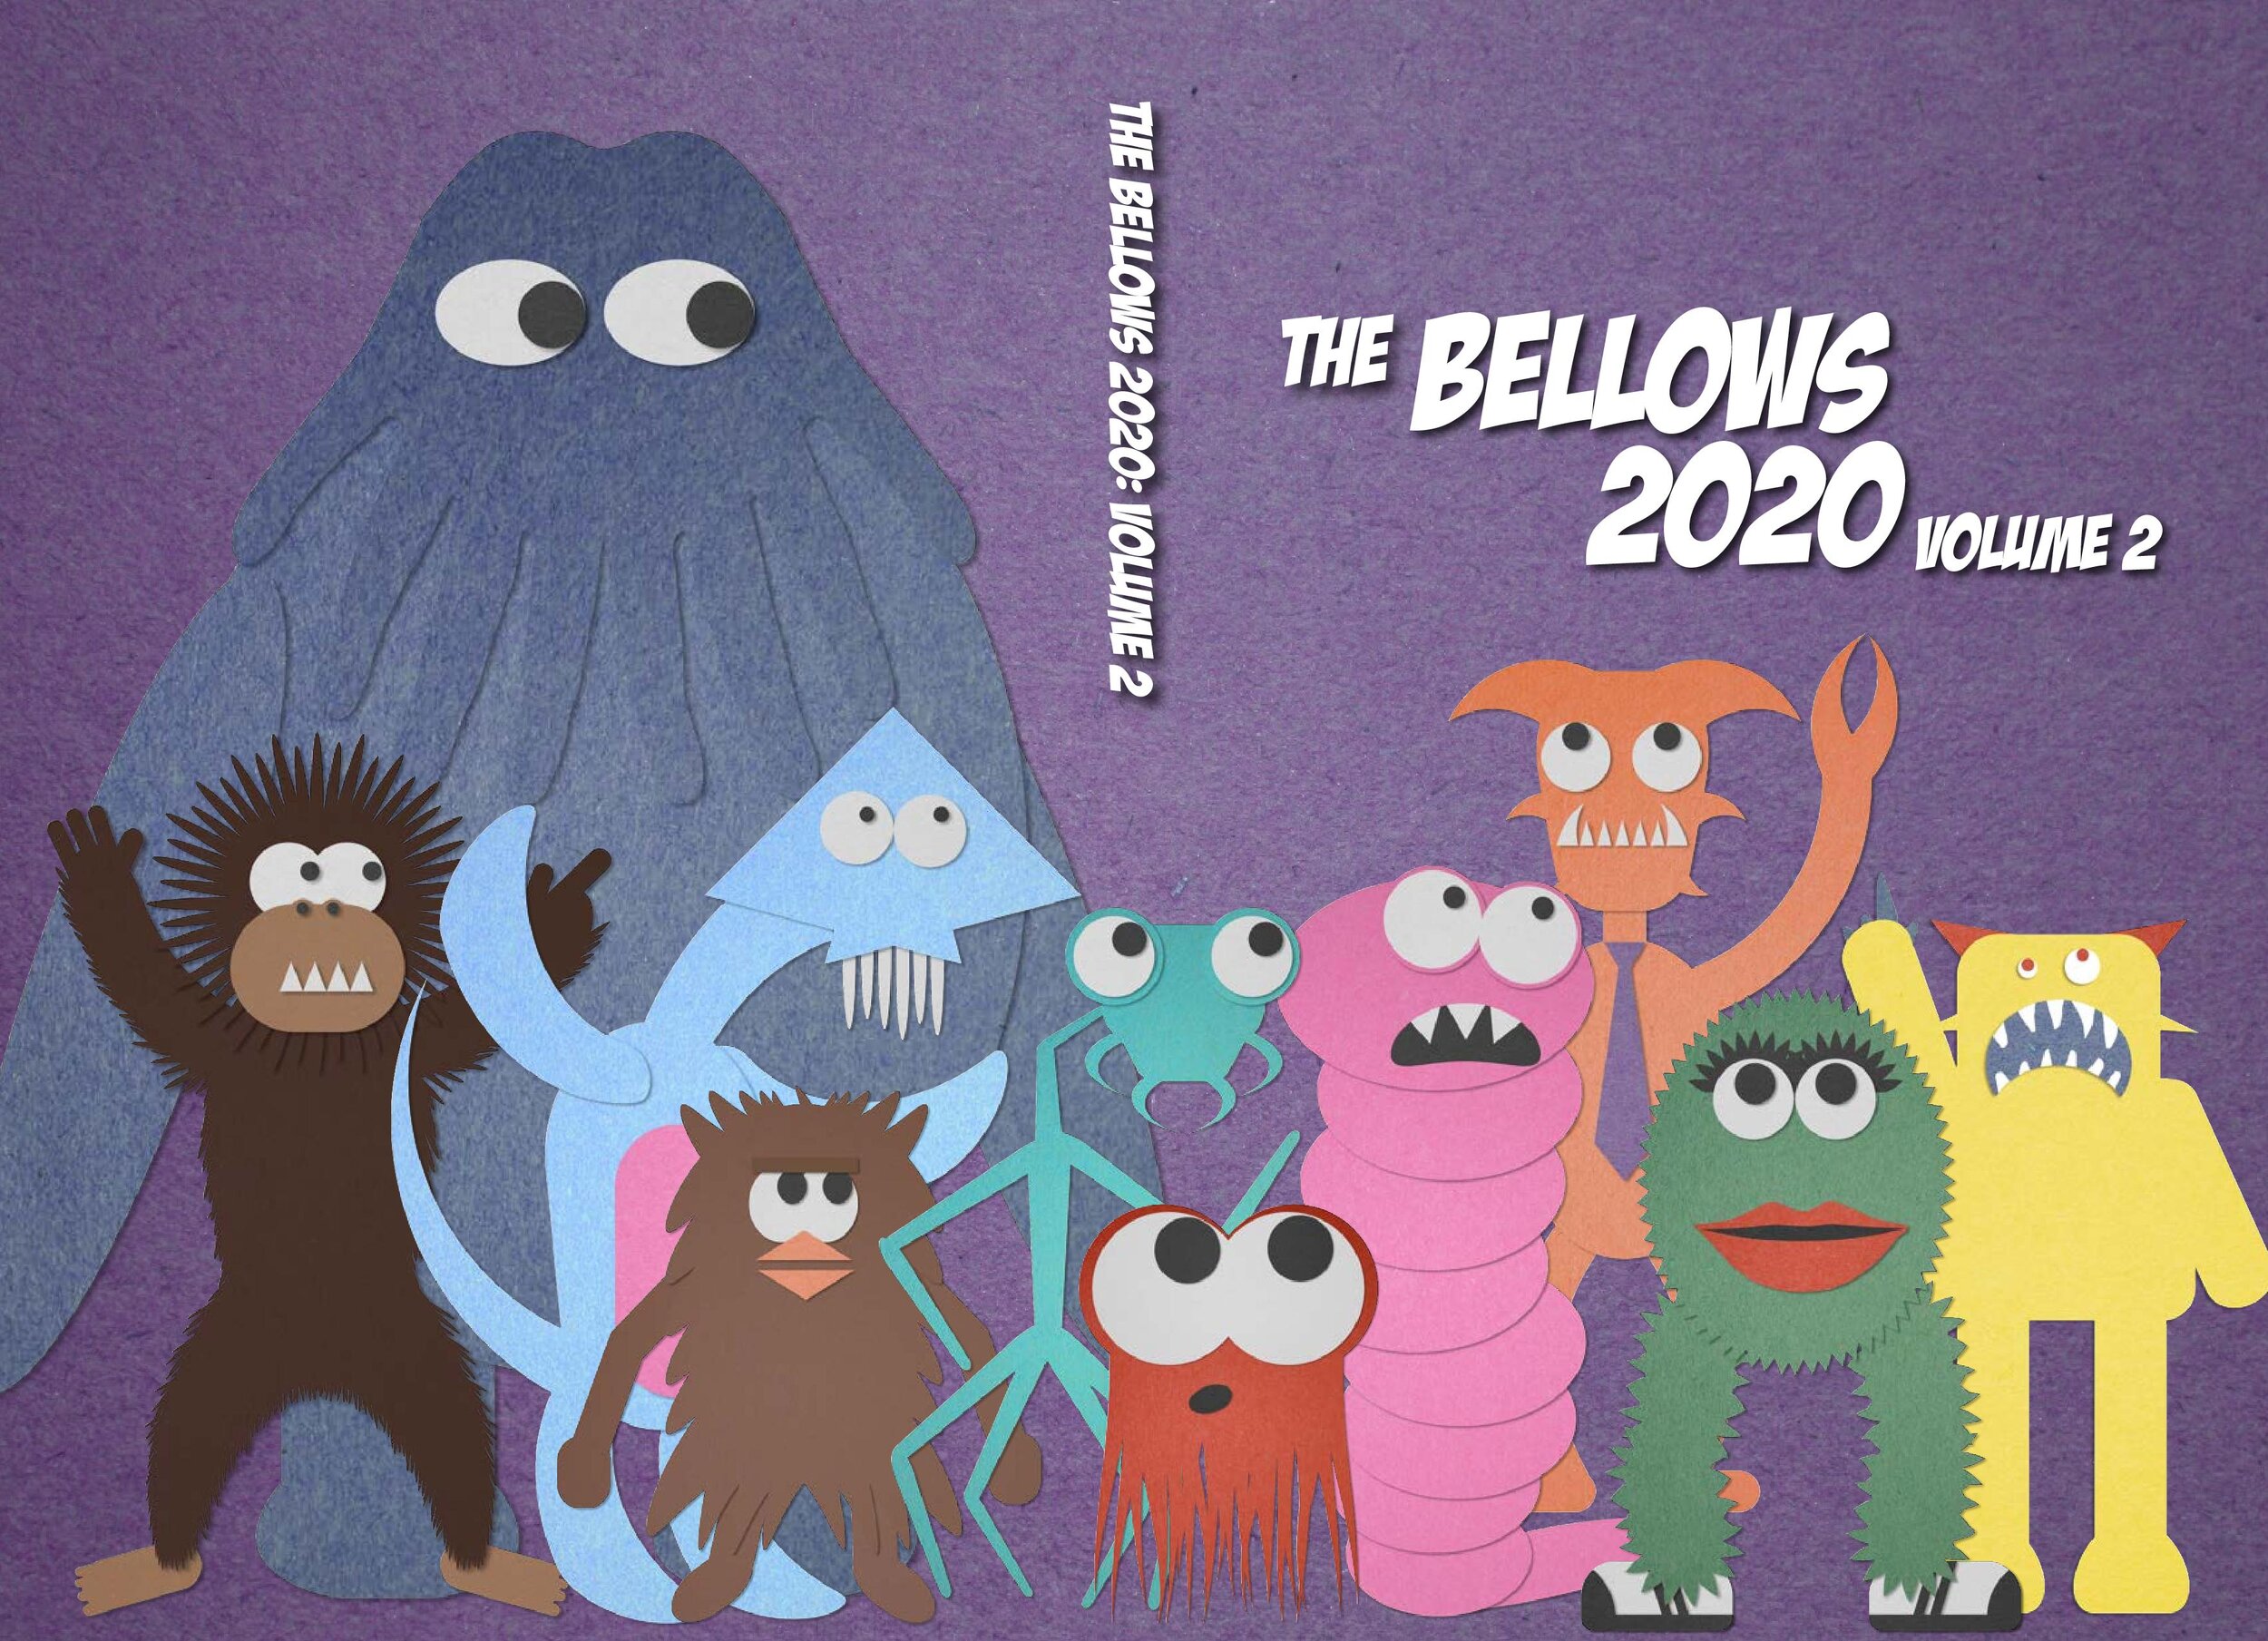 The Bellows 2020 - Volume 2-page-001.jpg